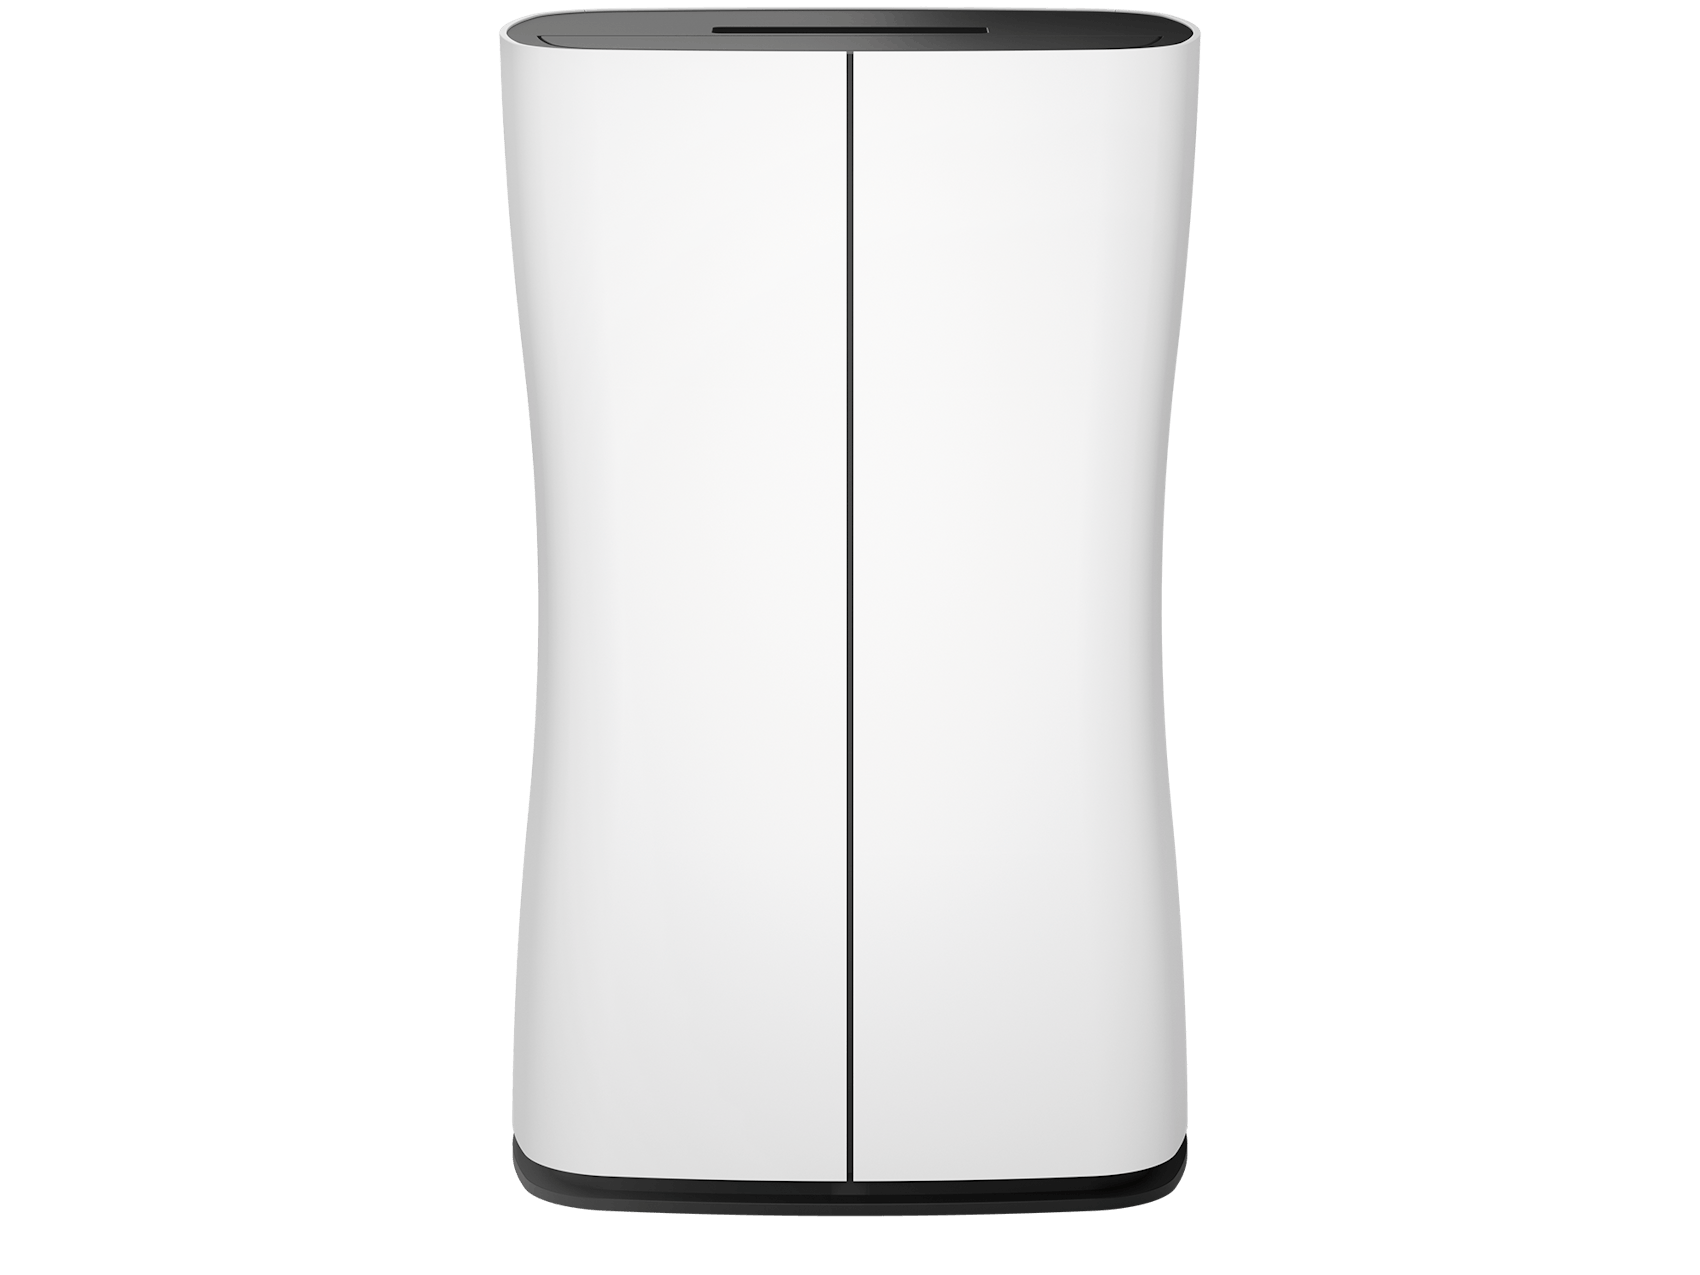 Theo dehumidifier by Stadler Form as front view